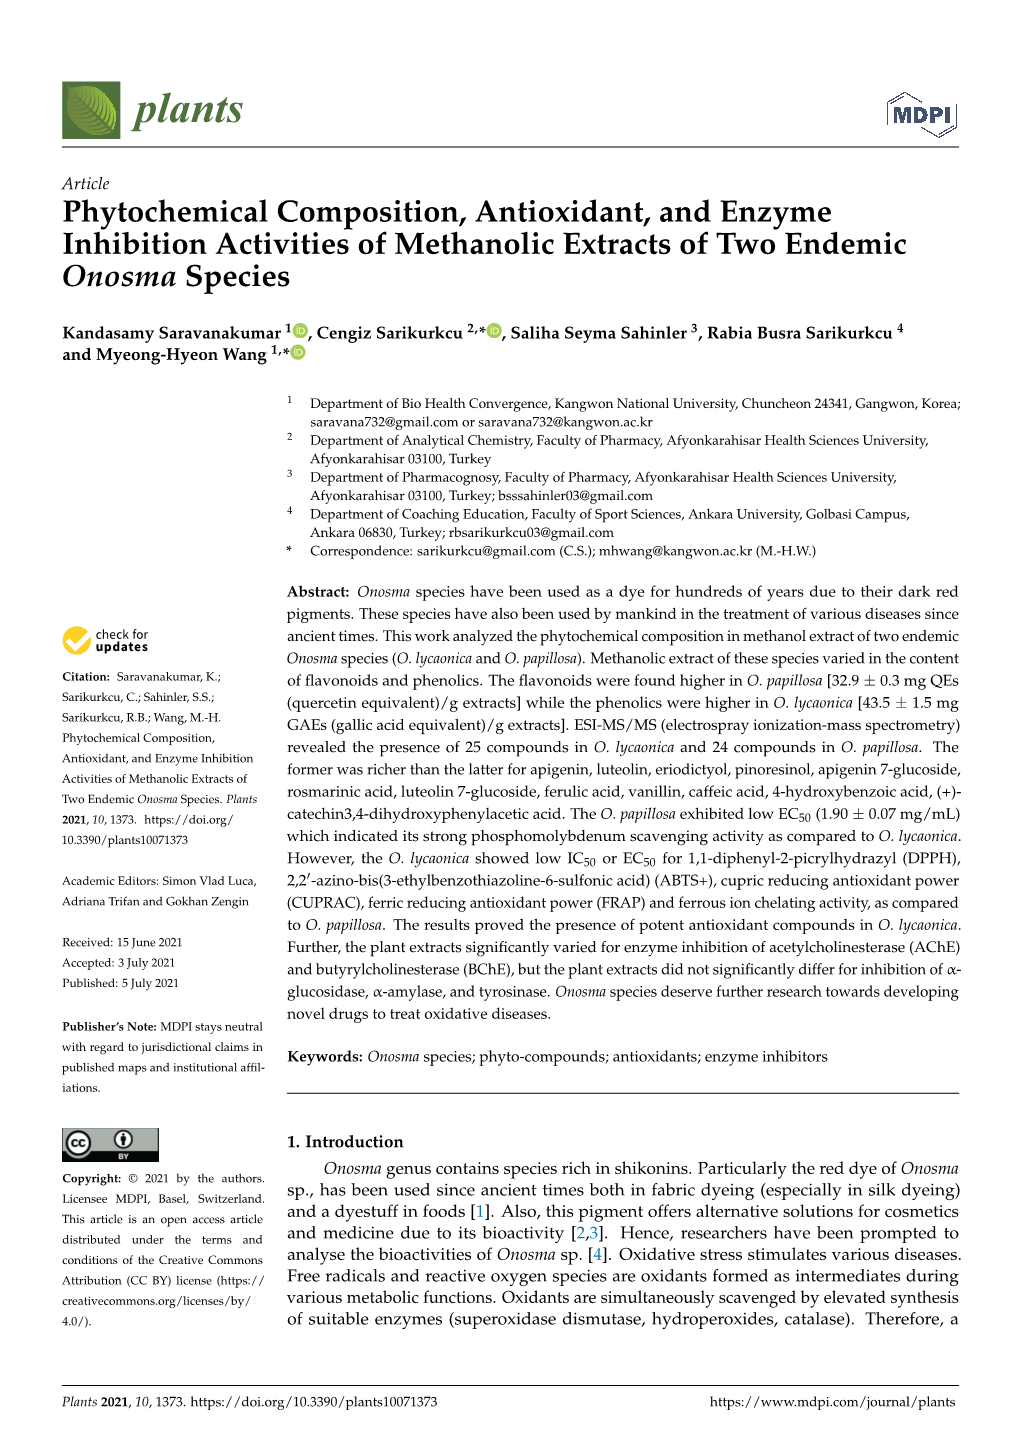 Phytochemical Composition, Antioxidant, and Enzyme Inhibition Activities of Methanolic Extracts of Two Endemic Onosma Species